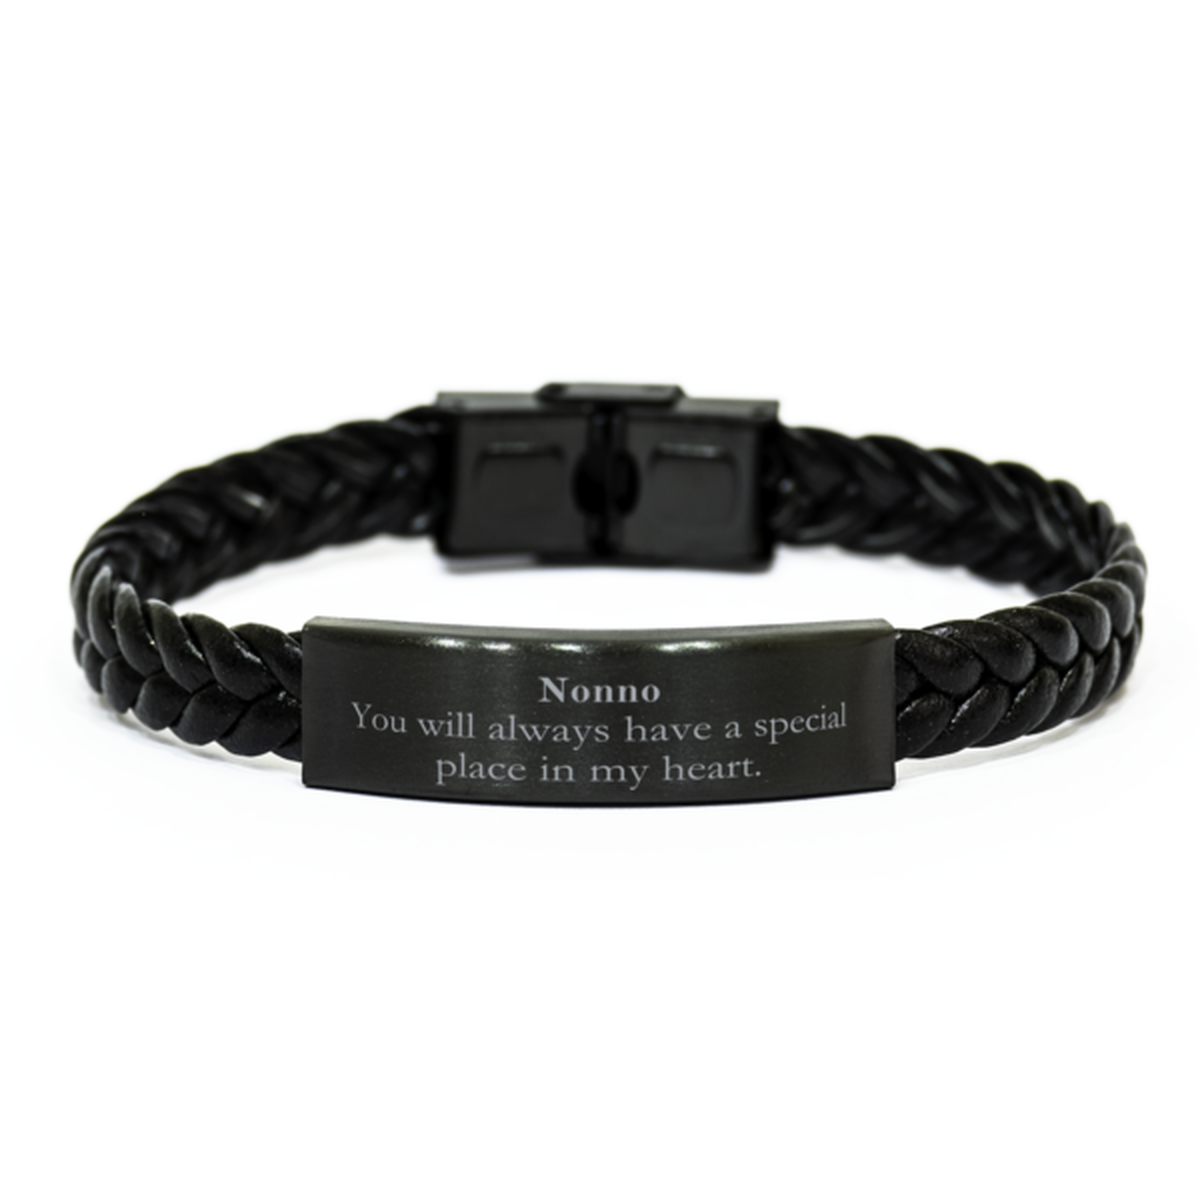 Braided Leather Bracelet Nonno You Will Always Have a Special Place in My Heart Engraved Gift for Grandpa Birthday Christmas Fathers Day Veterans Day Token of Love and Appreciation